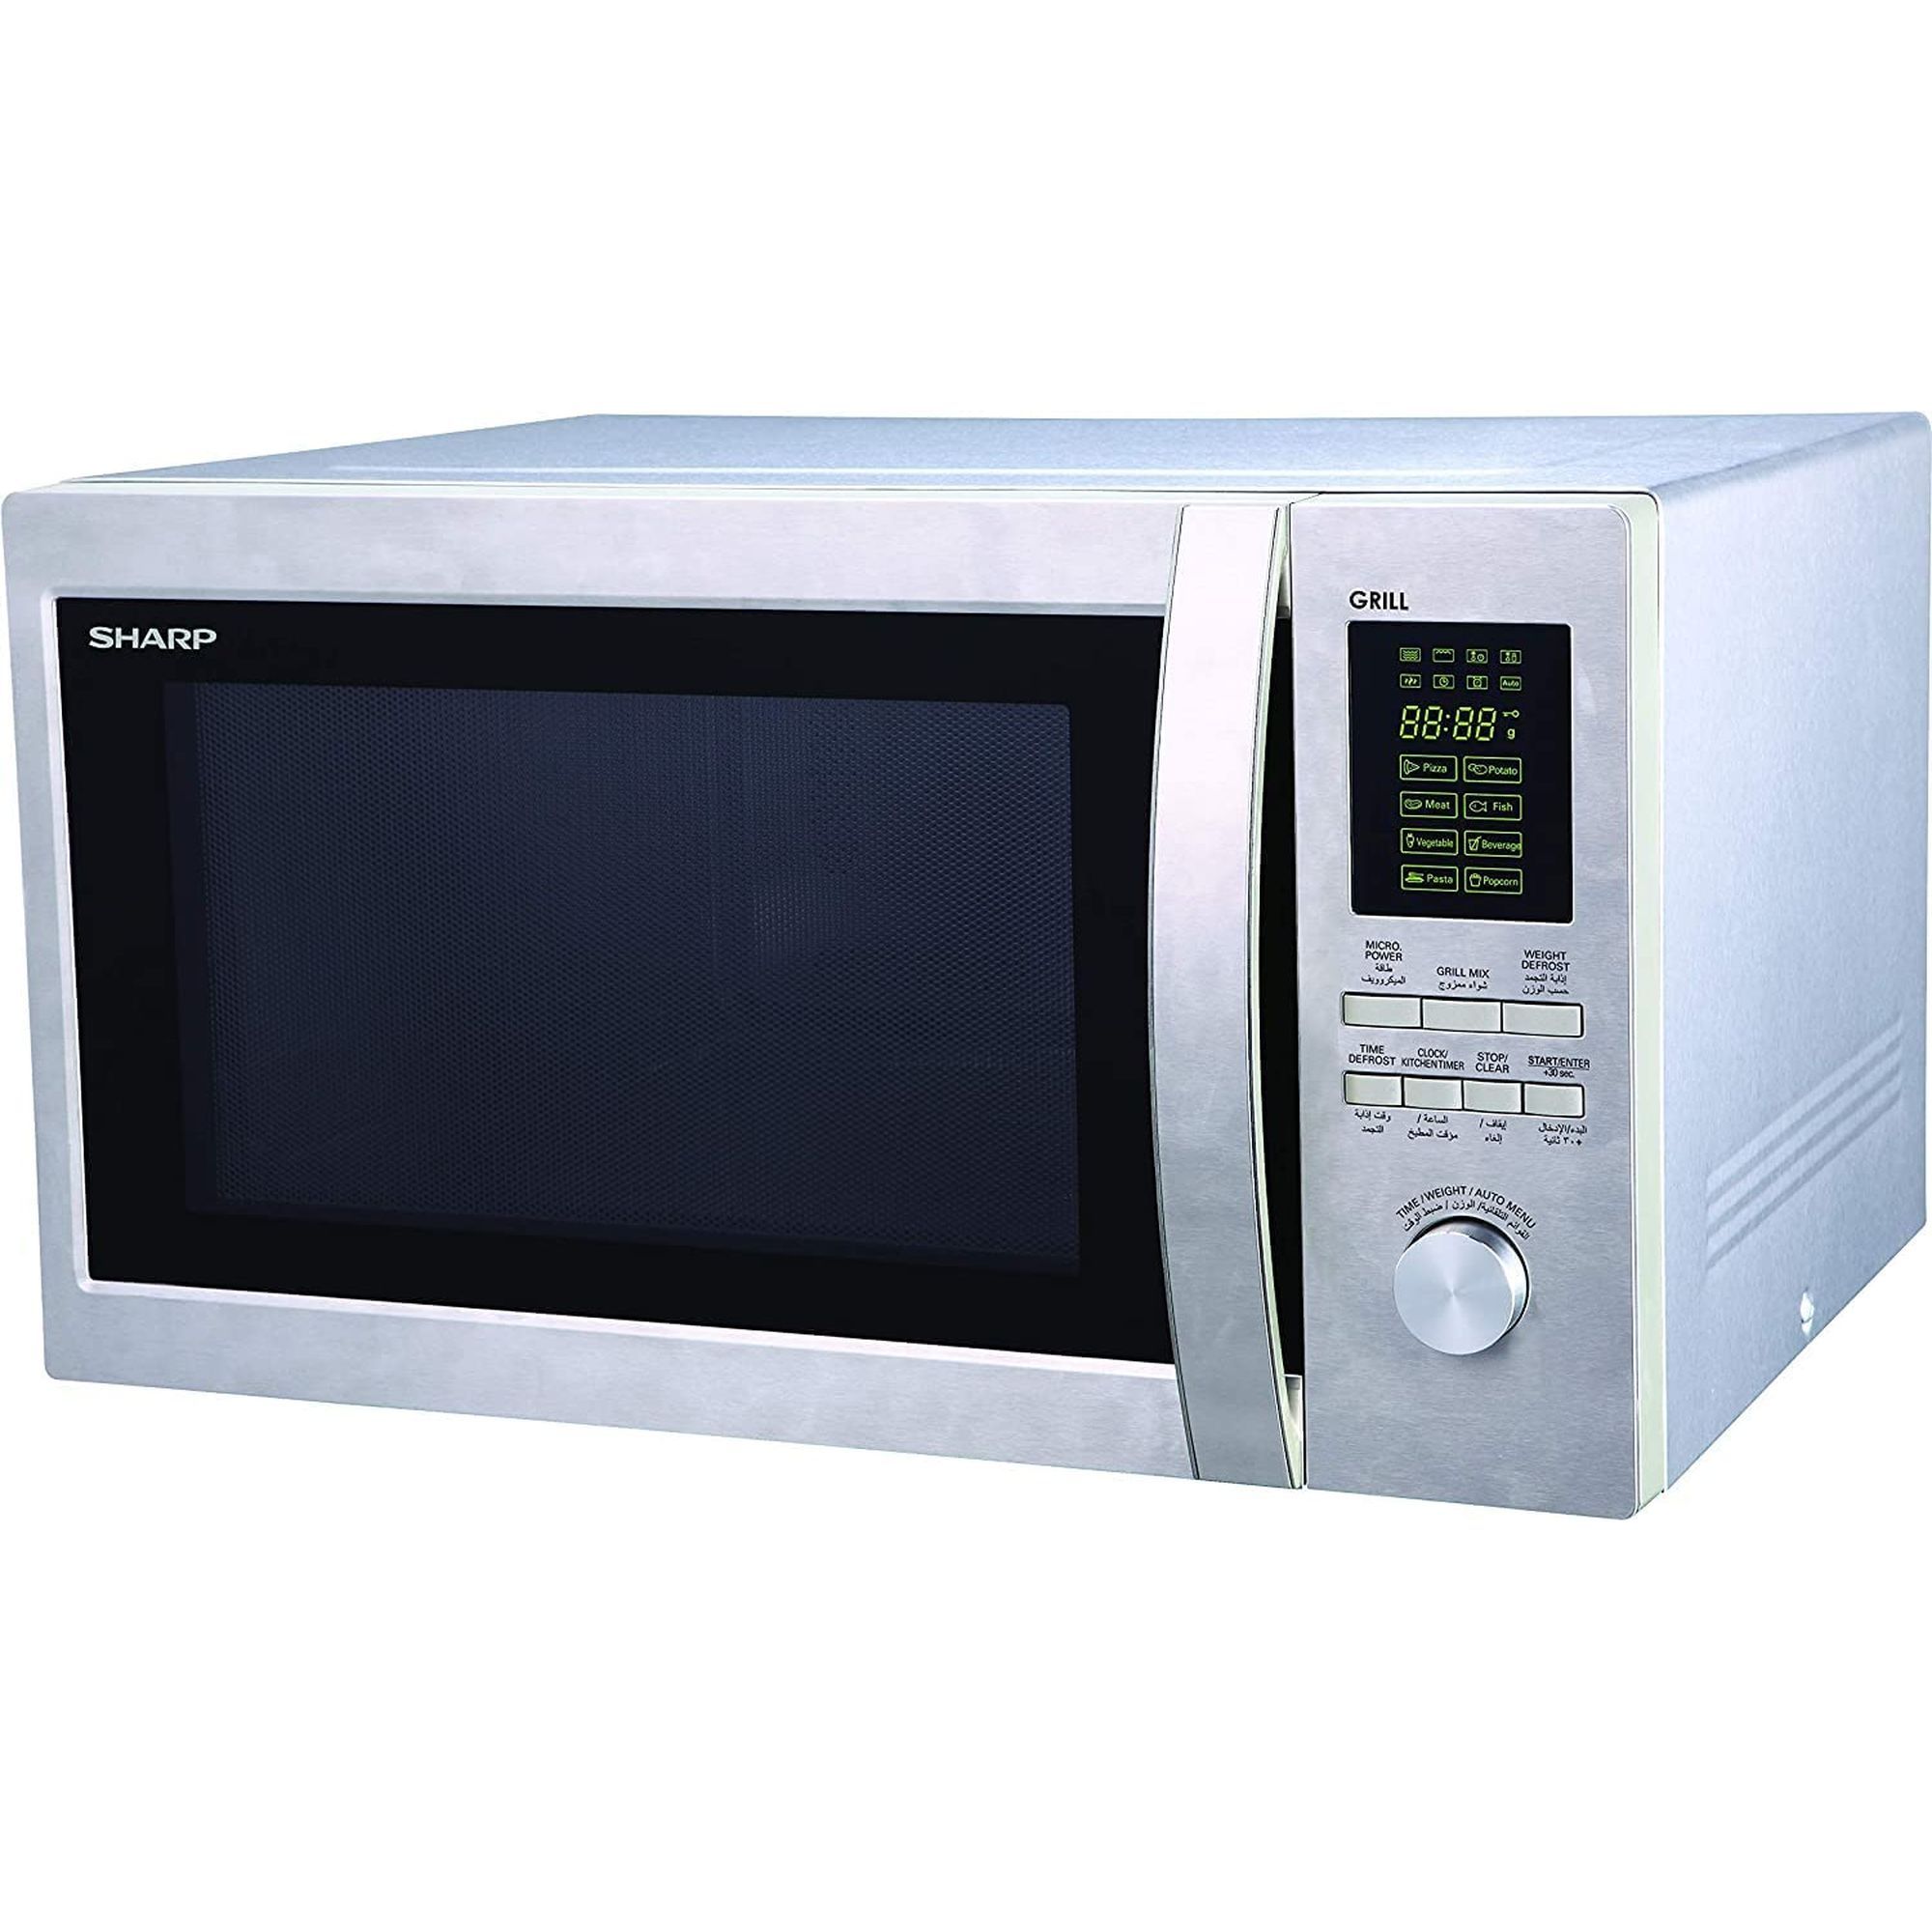 Sharp Steel Microwave With Grill, 43L - R/78BT/ST